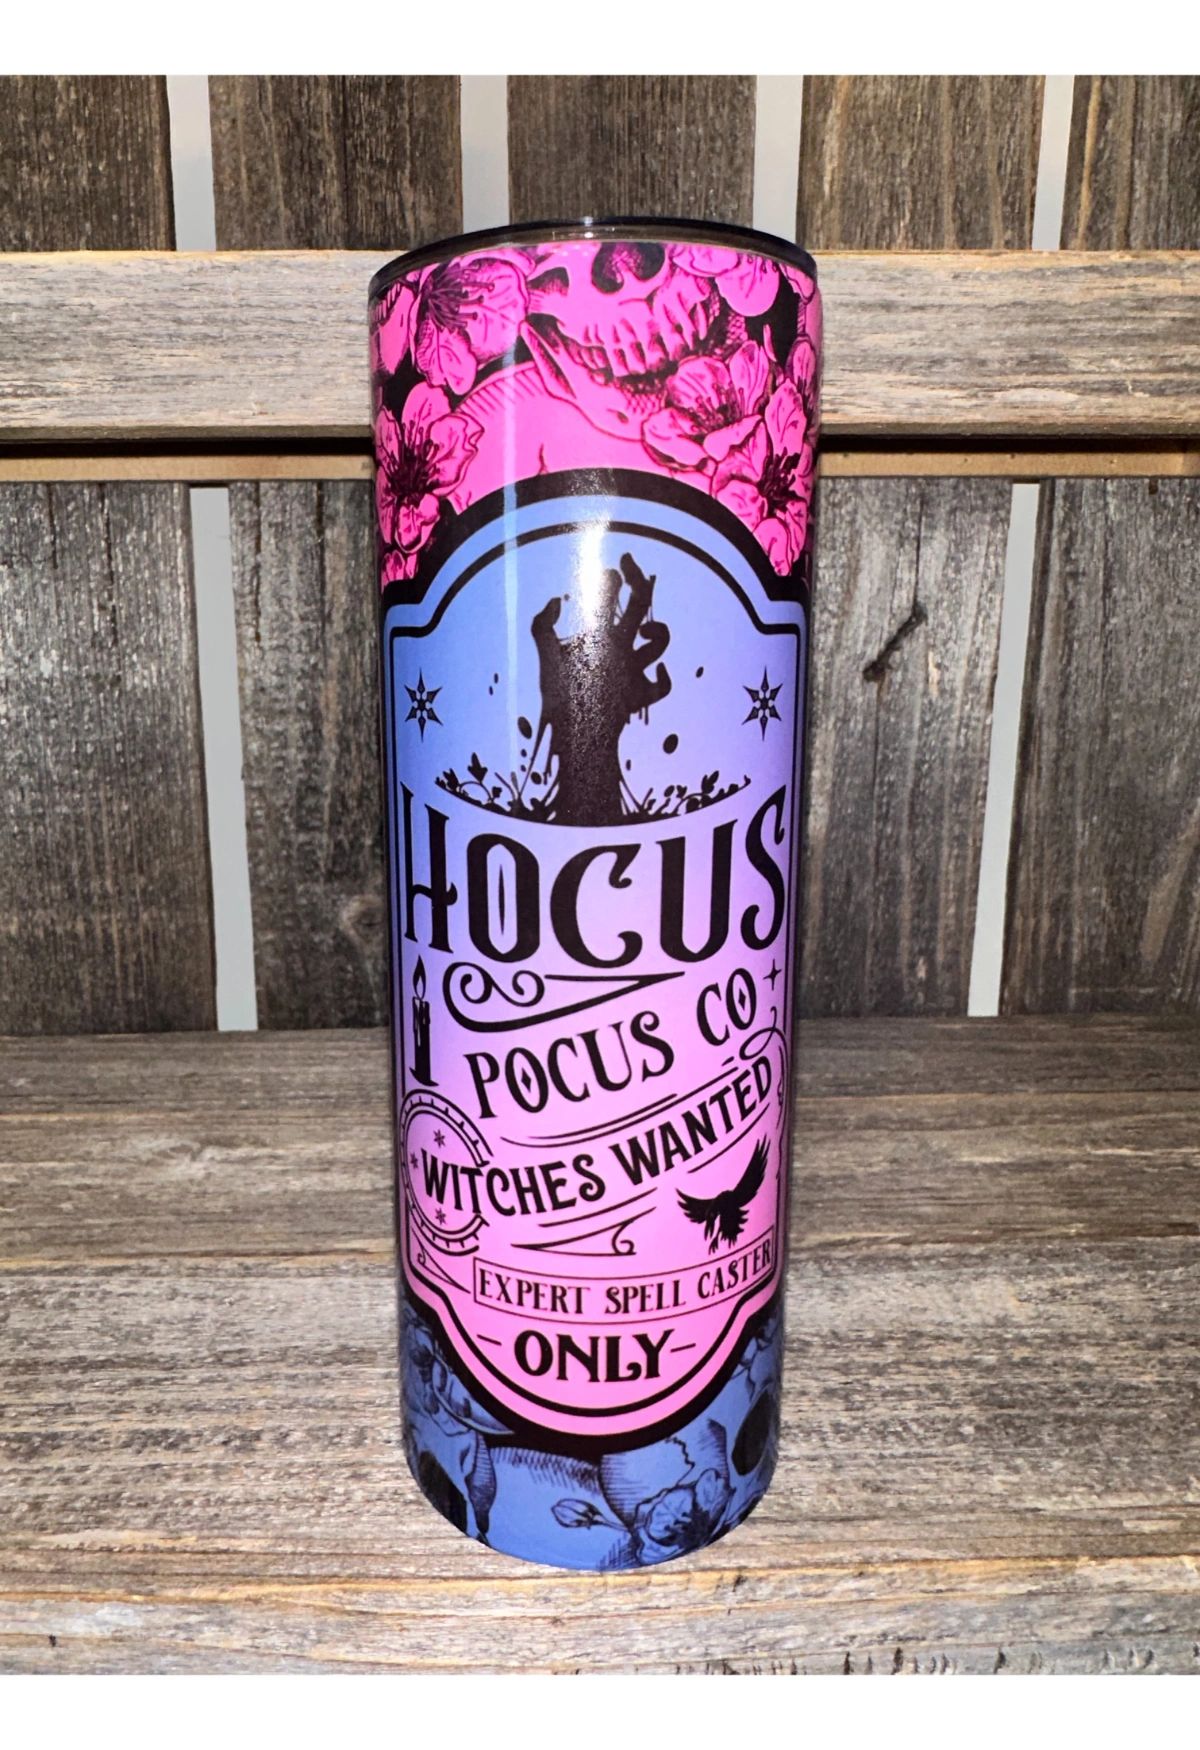 https://img1.wsimg.com/isteam/ip/37e10140-0757-4945-9cf7-787ae07165a7/ols/2054%20-%20Hocus%20Pocus%20Witches%20Wanted%20-%20Side%201%20-%202.jpg/:/cr=t:0%25,l:0%25,w:100%25,h:100%25